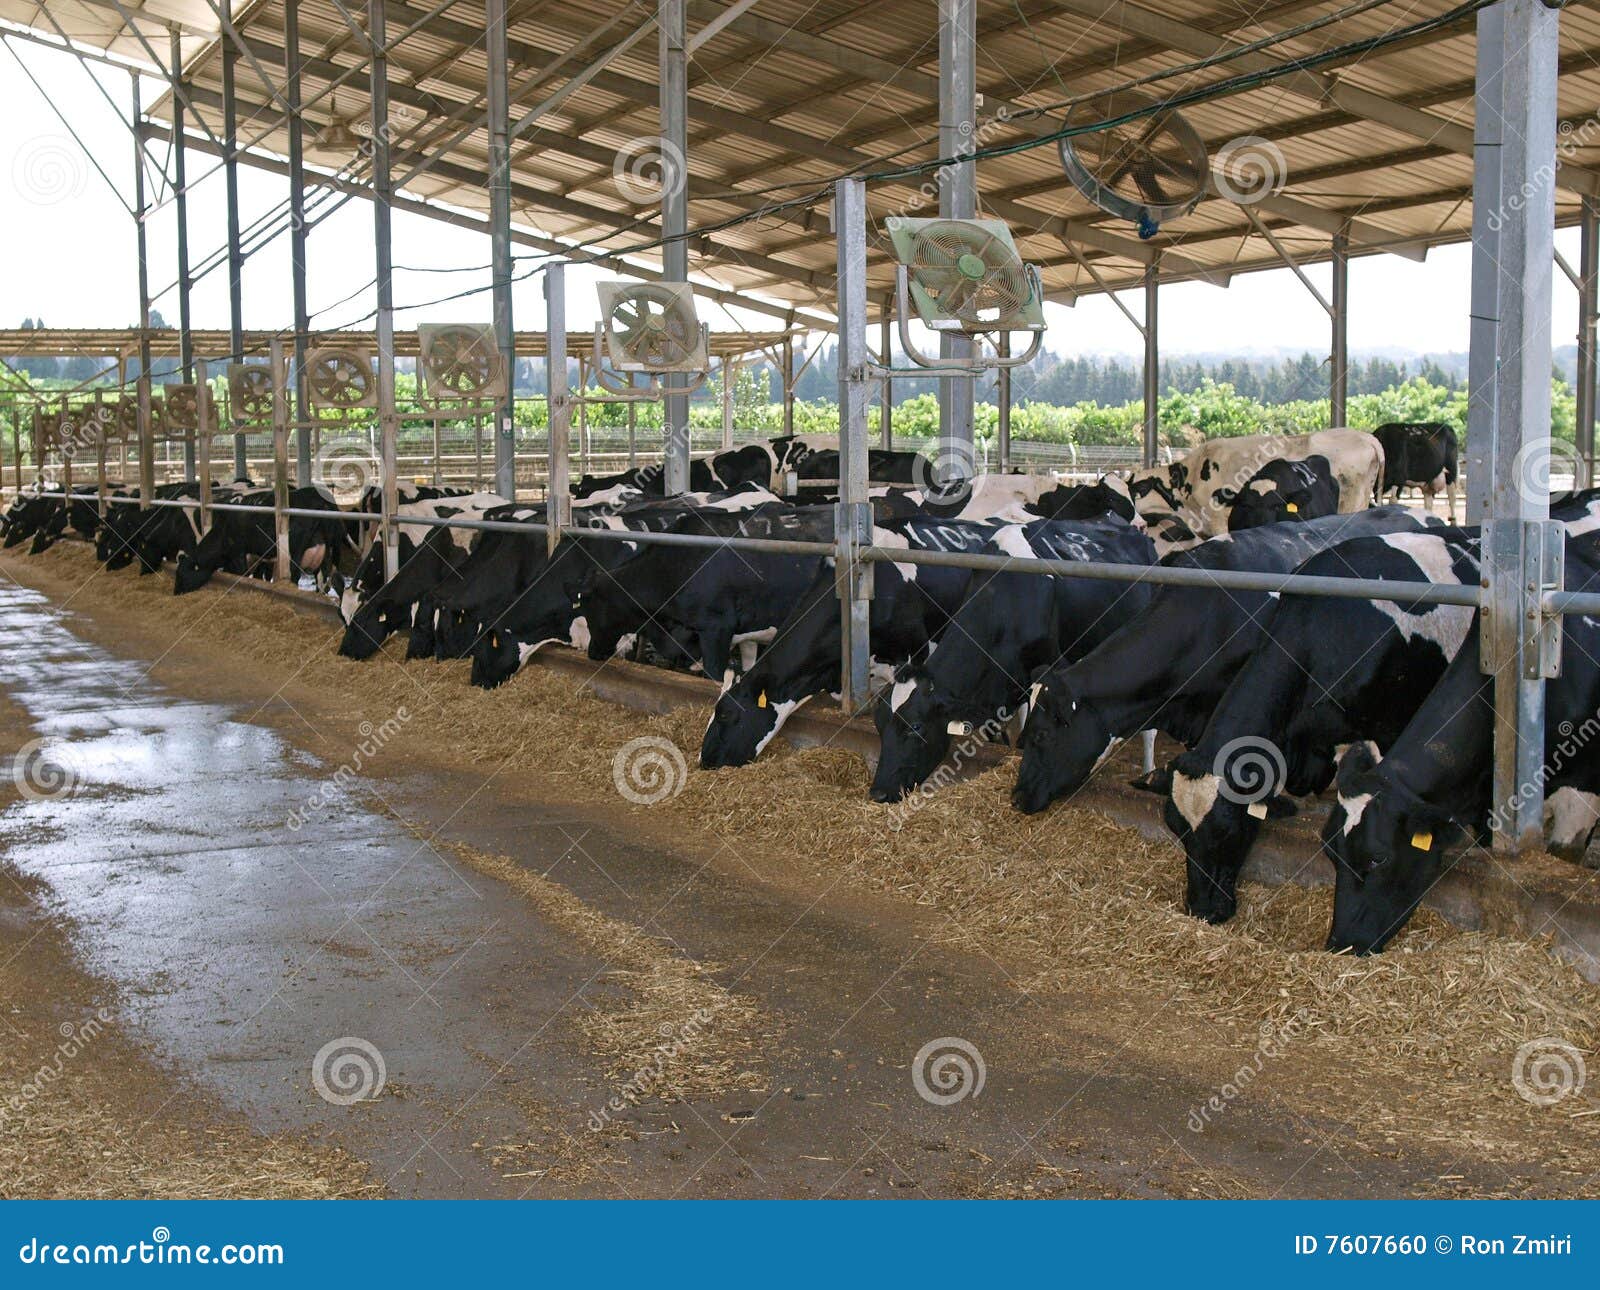 modern cowshed with cows